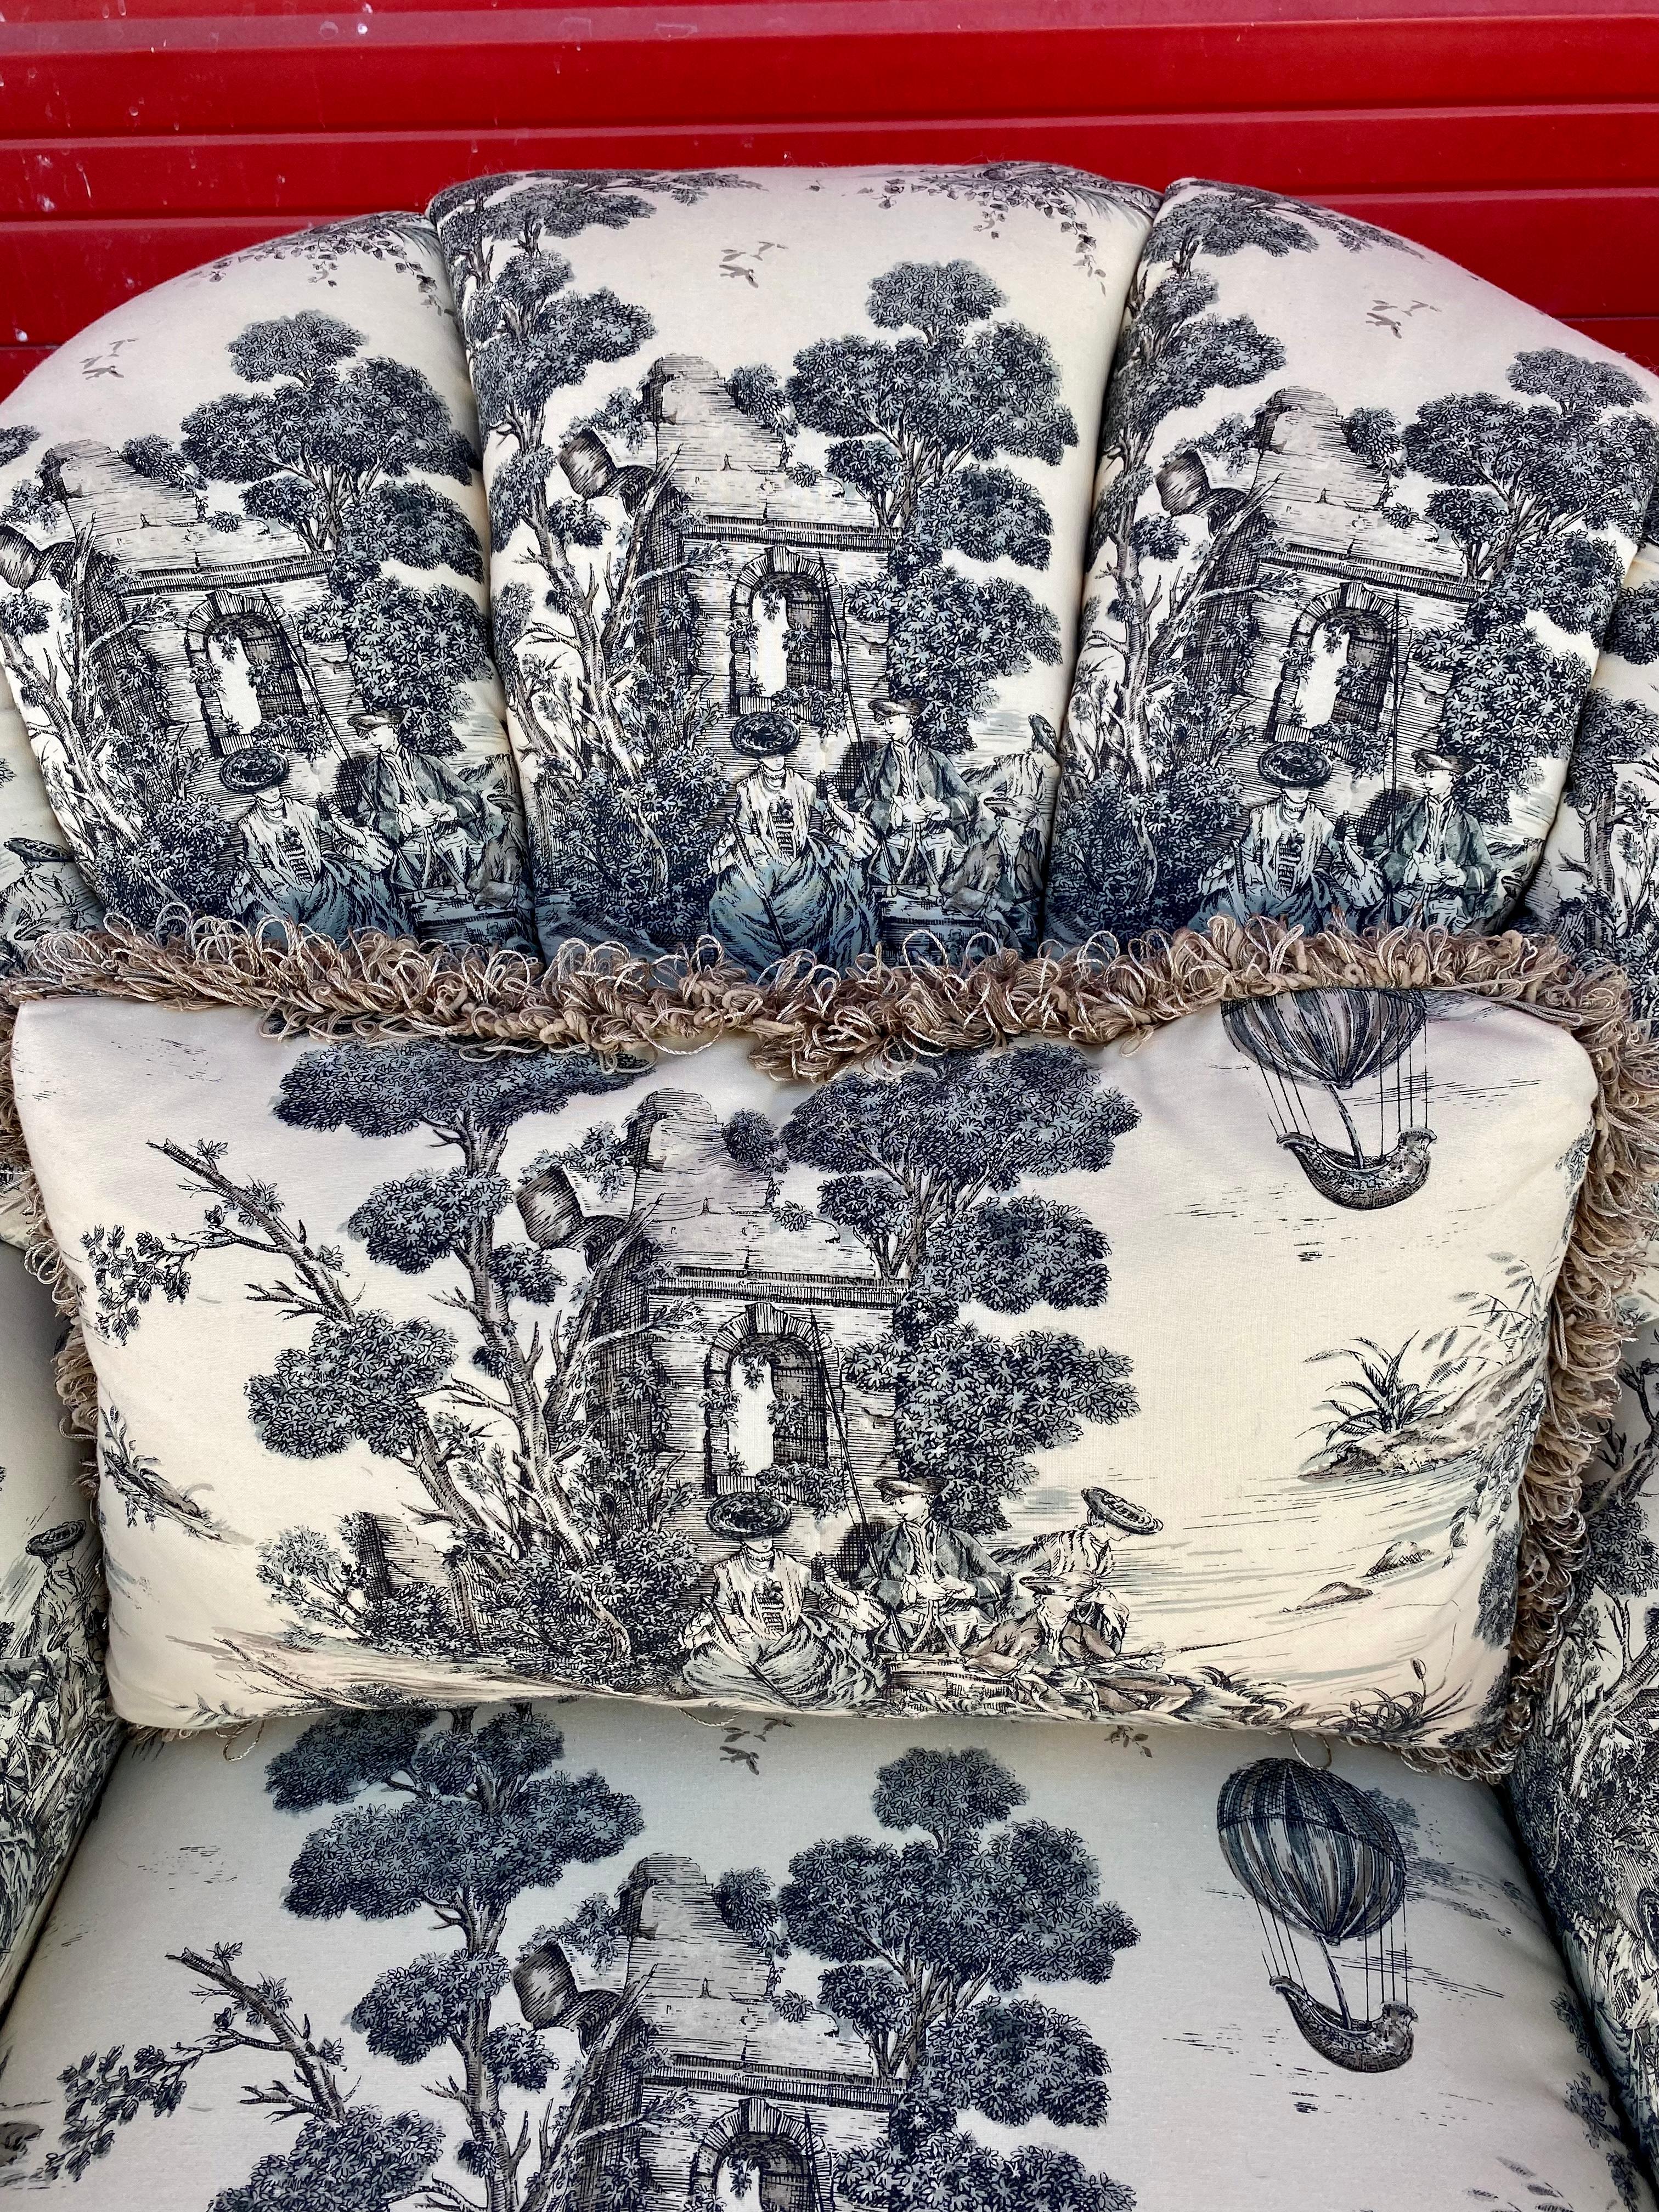 Upholstery C.R. Laine Chinoiserie Tufted English Arm Chairs, Set of 2 For Sale